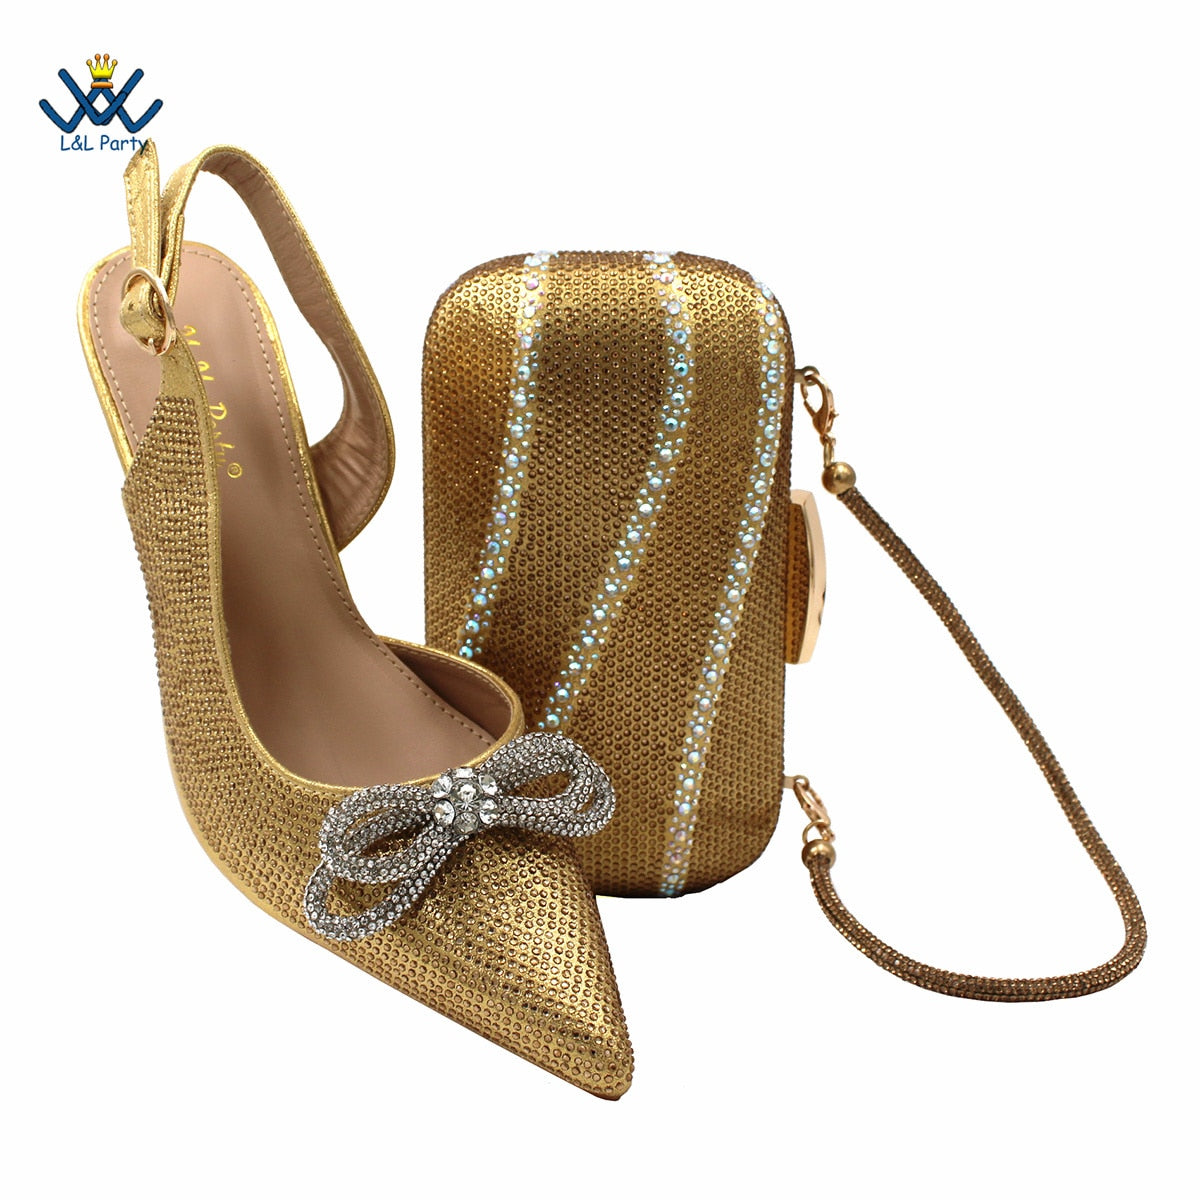 High Quality New Arrivals High Heels in Gold Color Italian Design Office Ladies Shoes Matching Bag Set For Wedding